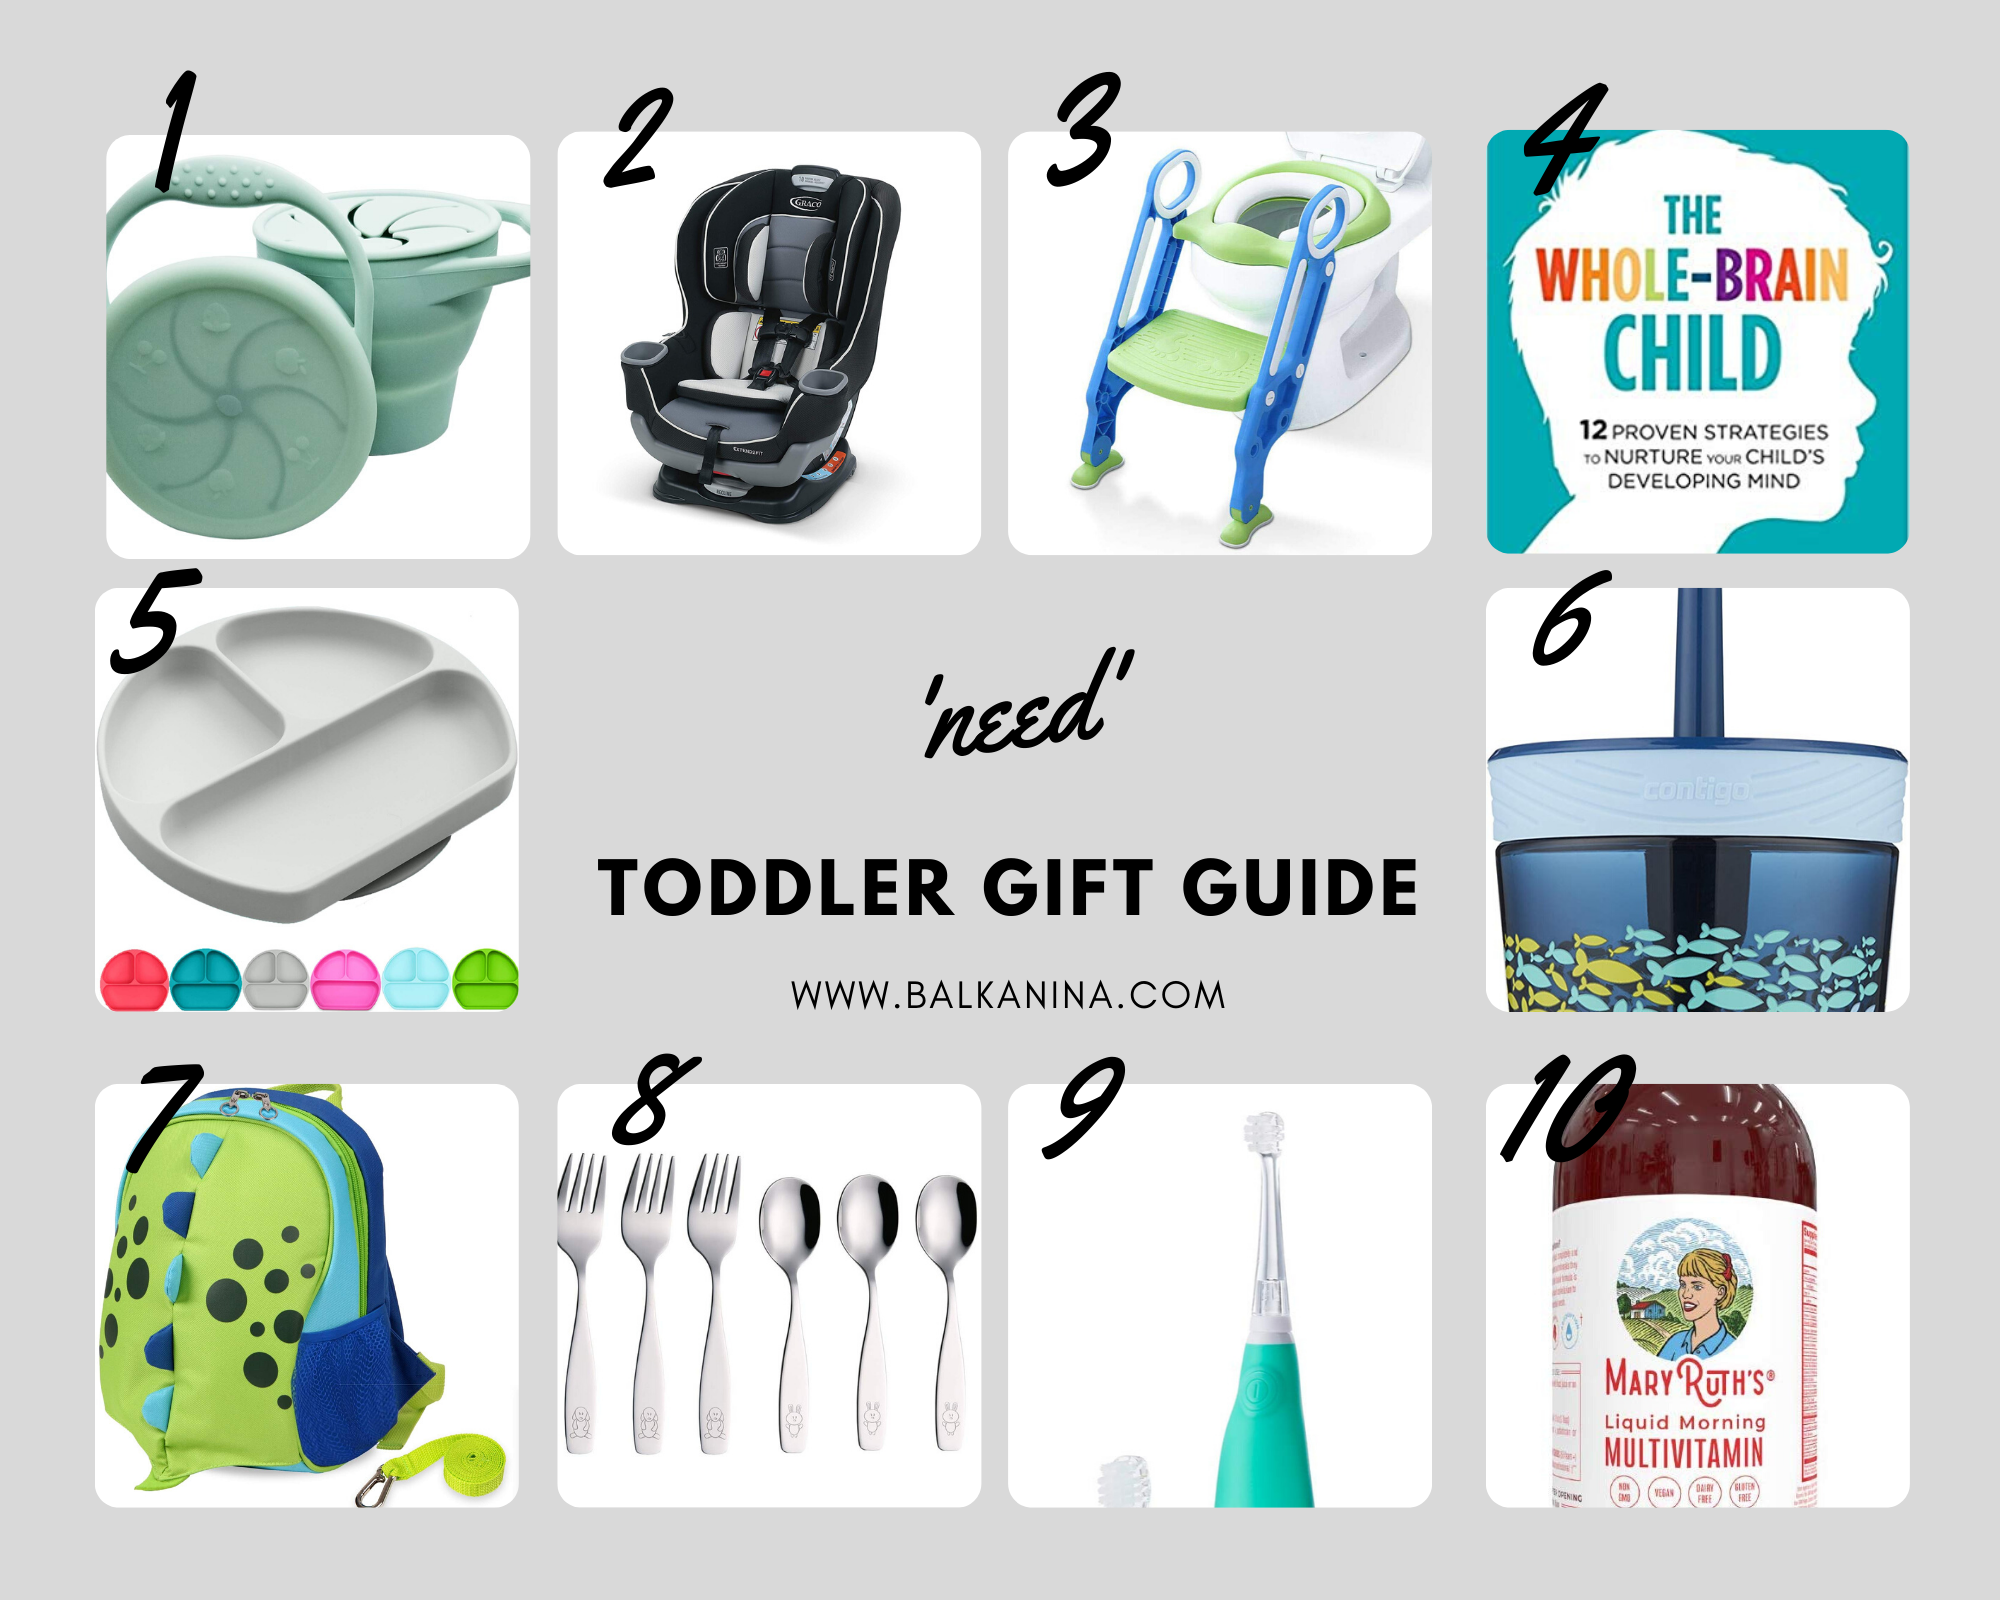 Toddler "need" gift guide